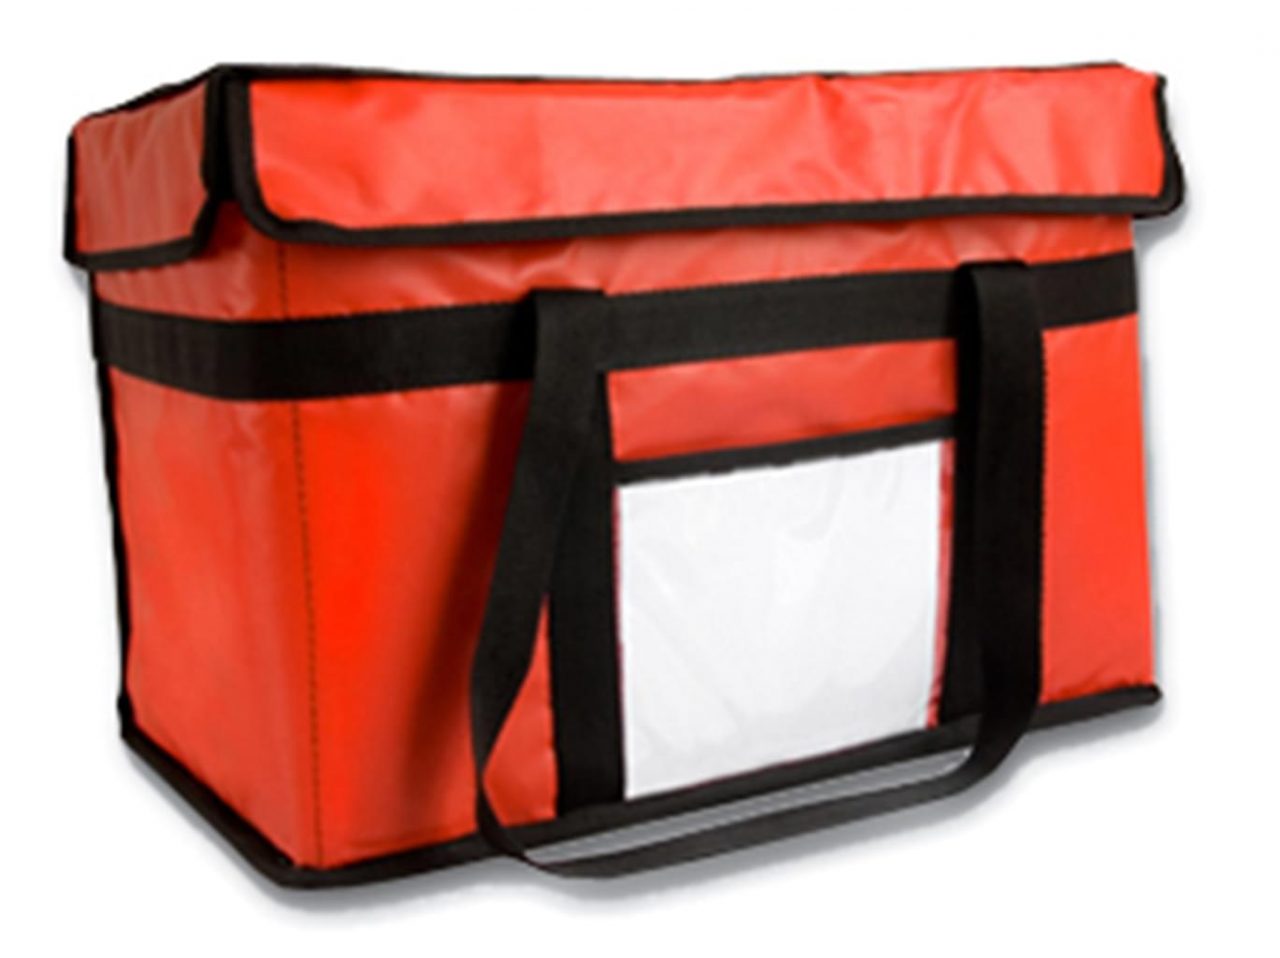 tempack-patient-bags-covers-reusable-packaging-3@2x-1280x958